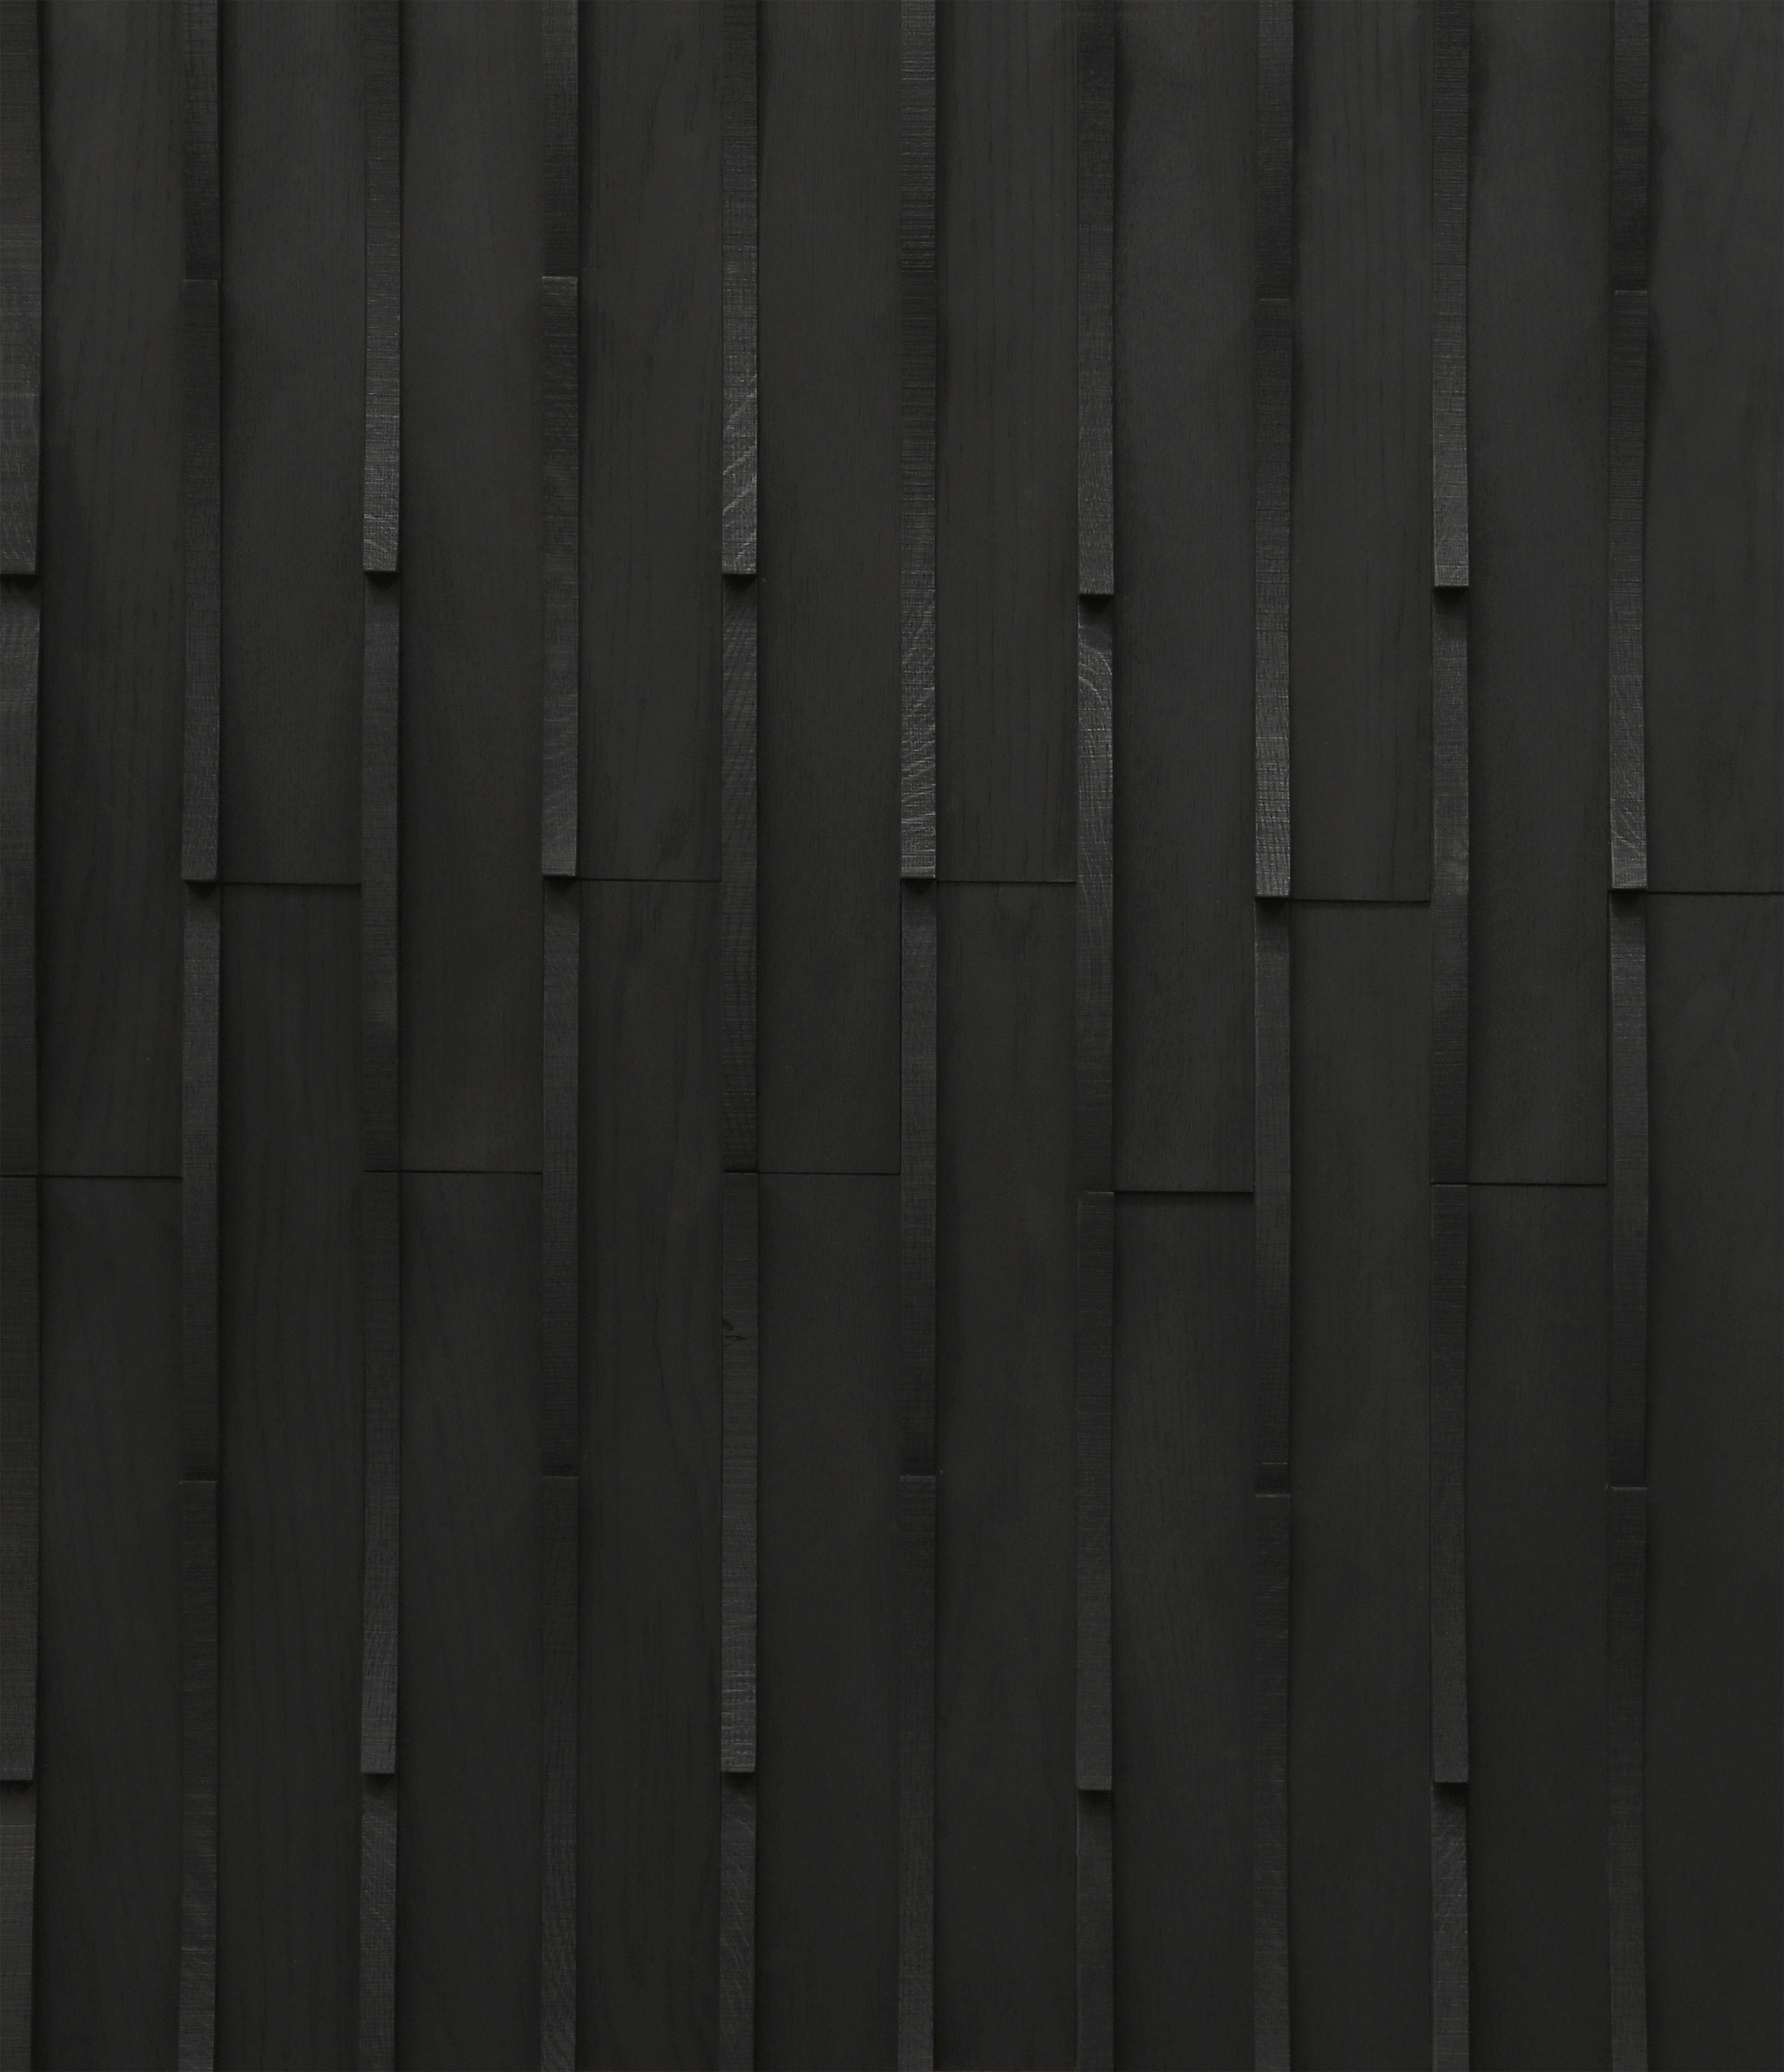 duchateau inceptiv infuse noir oak three dimensional wall natural wood panel lacquer for interior use distributed by surface group international